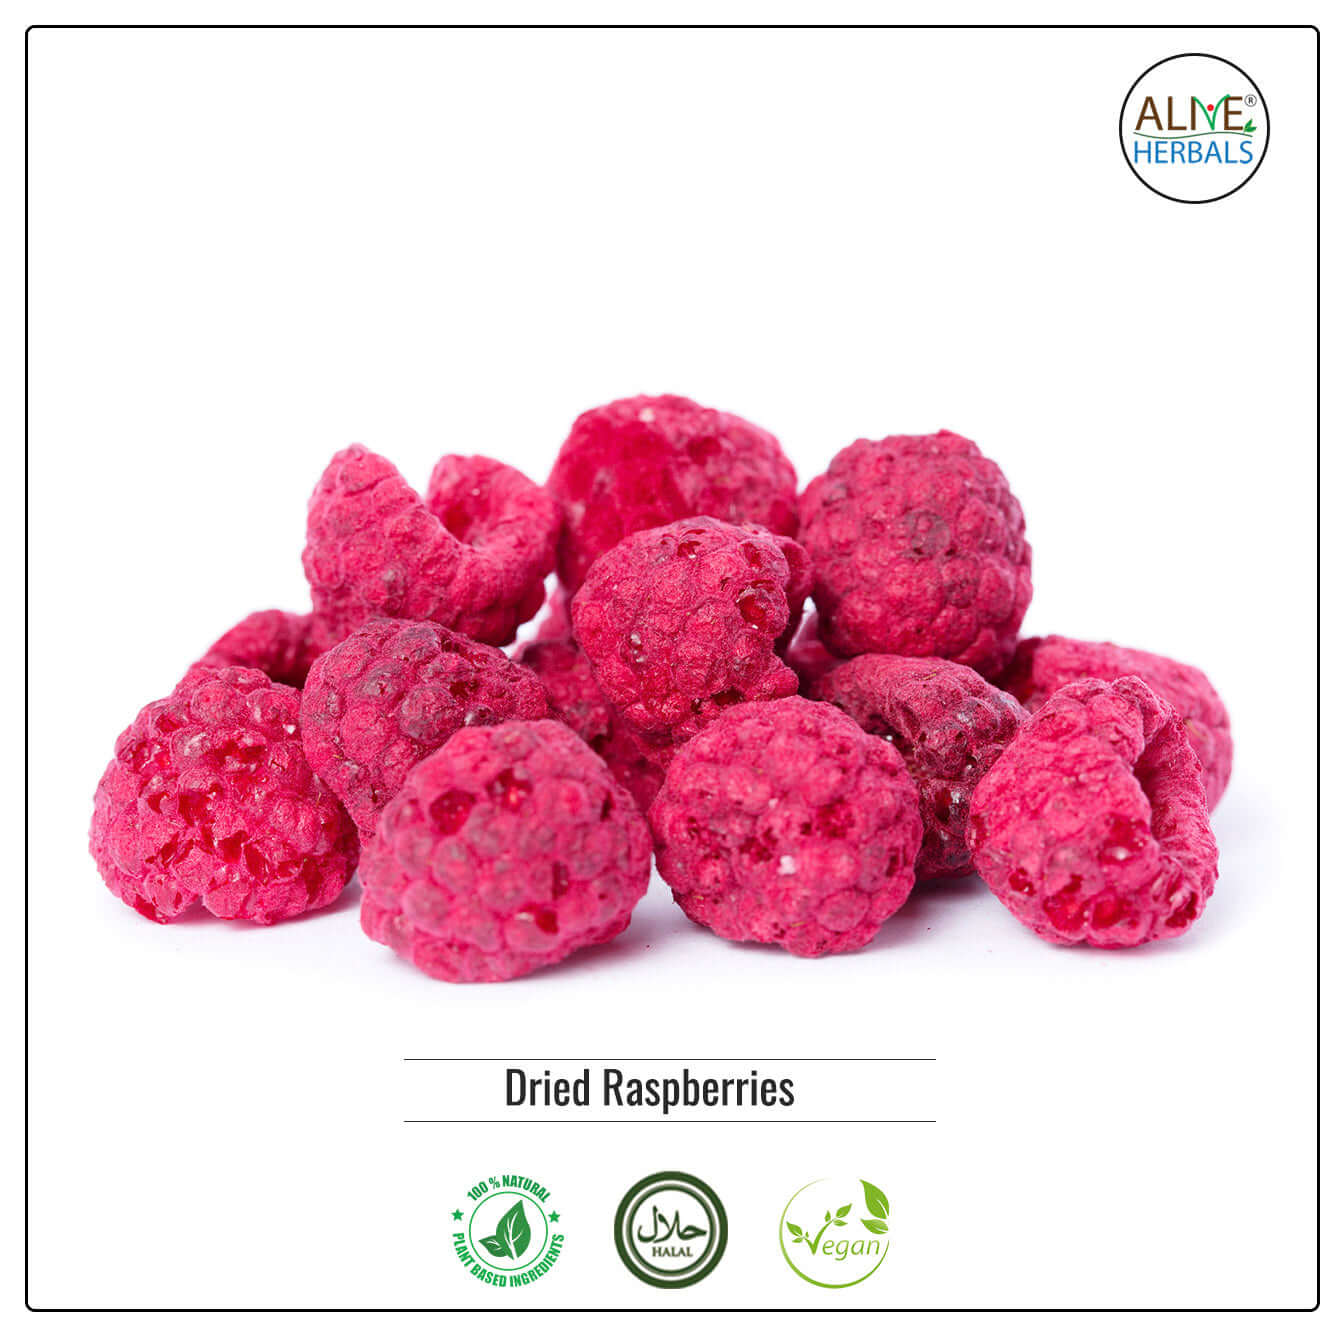 Dried Raspberry - Buy at Natural Food Store | Alive Herbals.